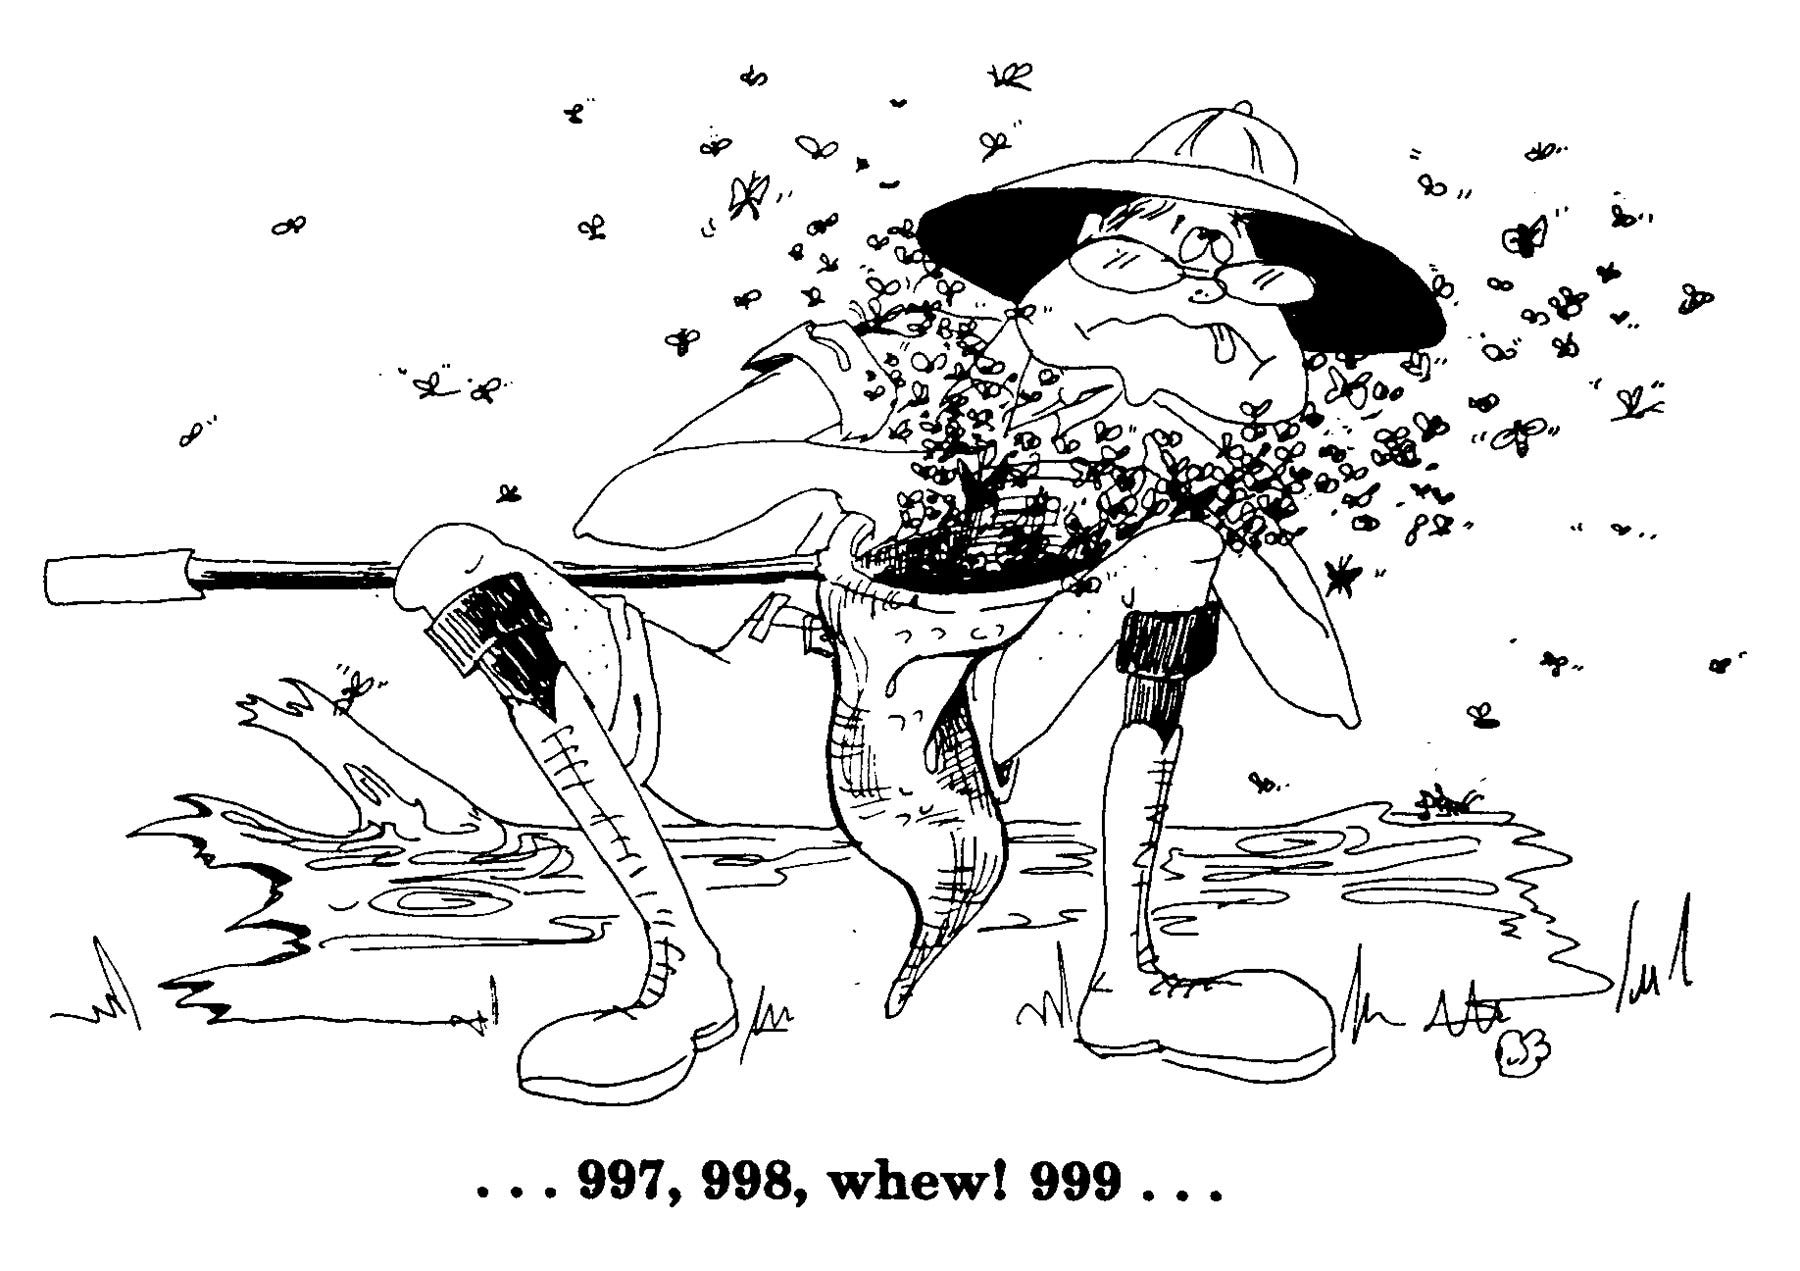 Courtesy of Tom Turpin -  A black and white cartoon drawing of Bug Scout 